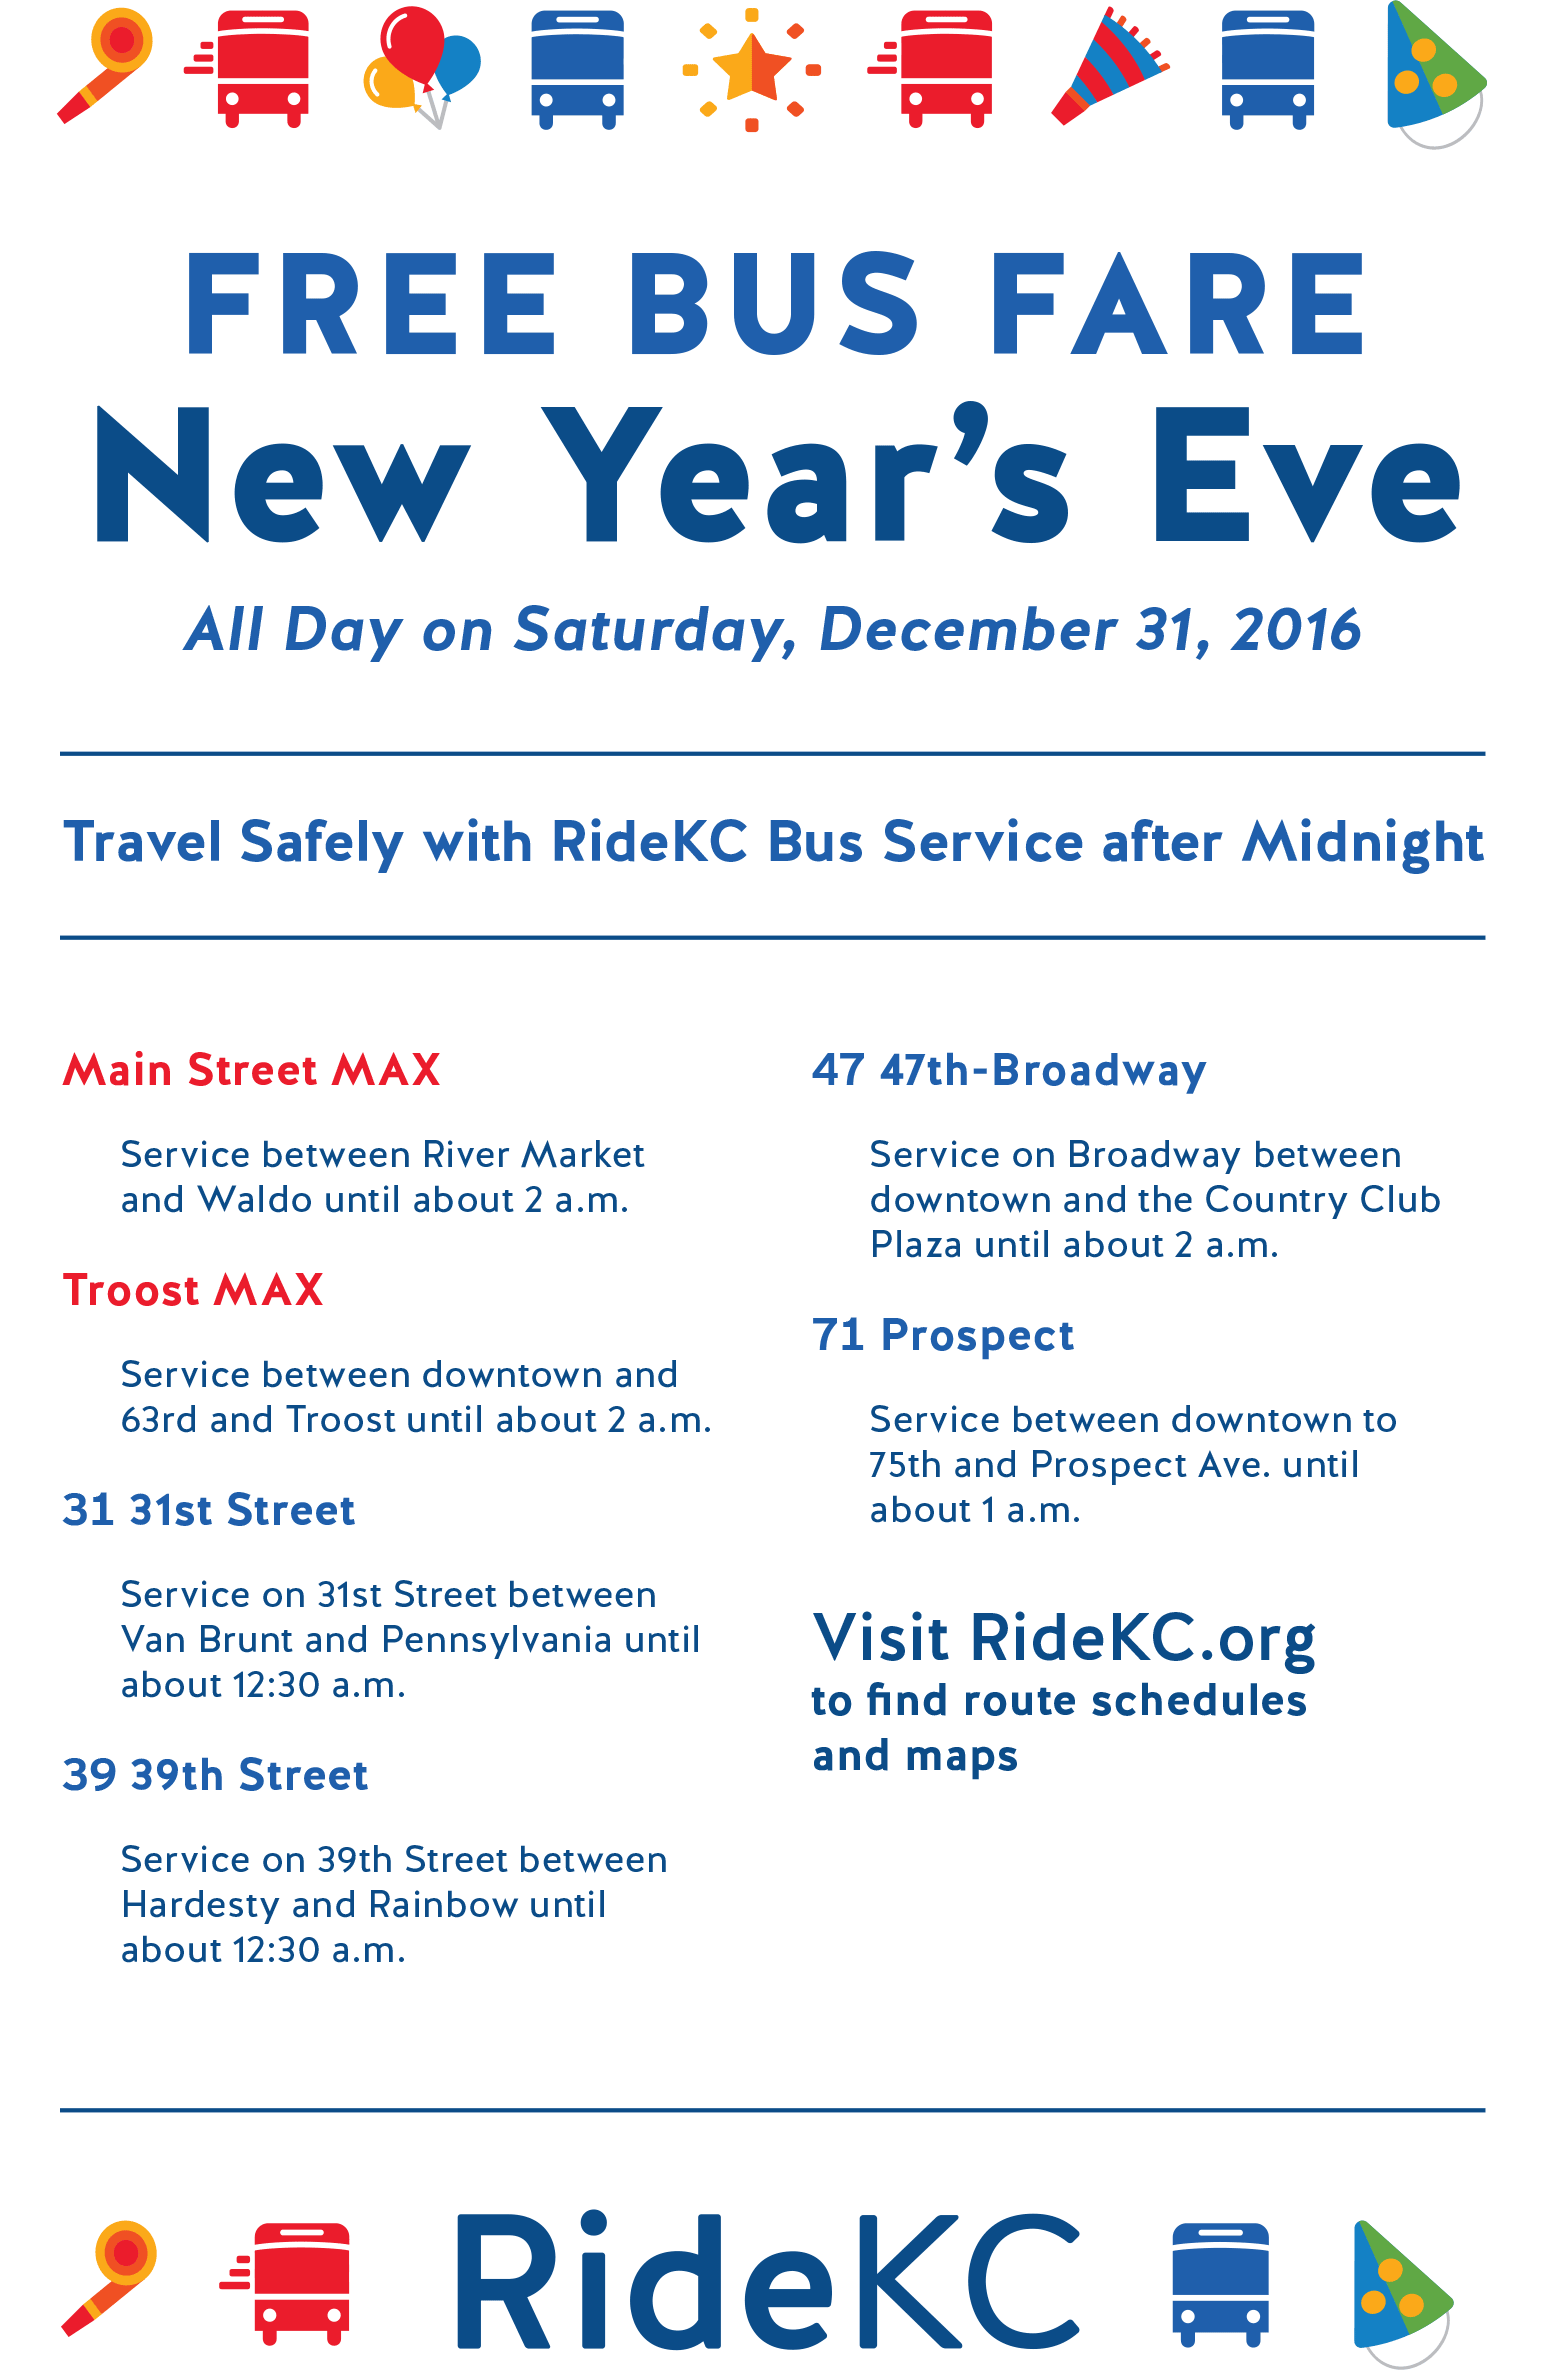 Routes offering late night service